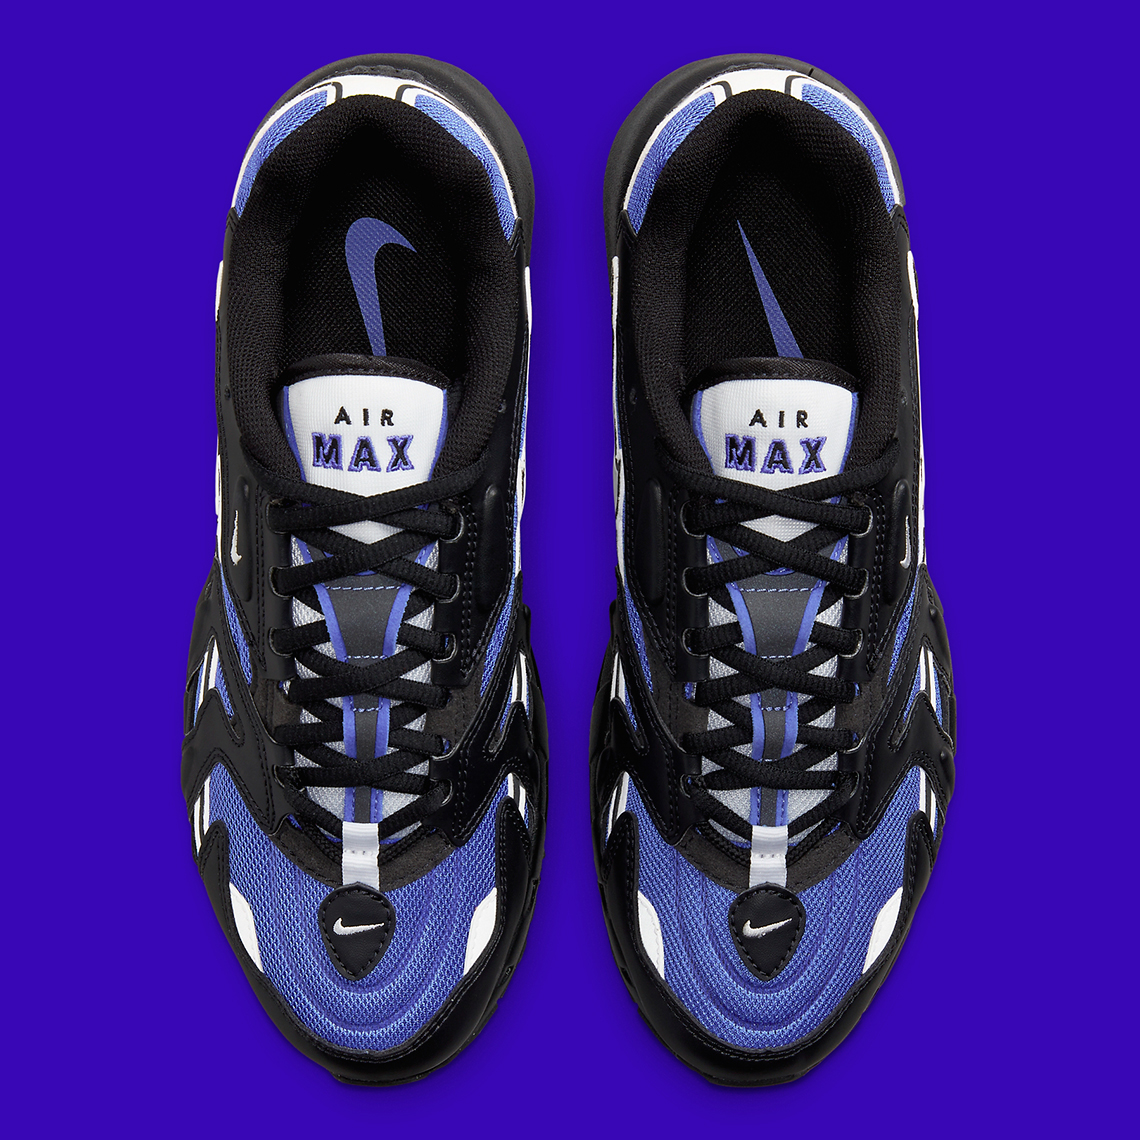 Nike will also be releasing a Tie-Dye rendition of the Blazer Mid Ii Persian Violet Db0251 500 7